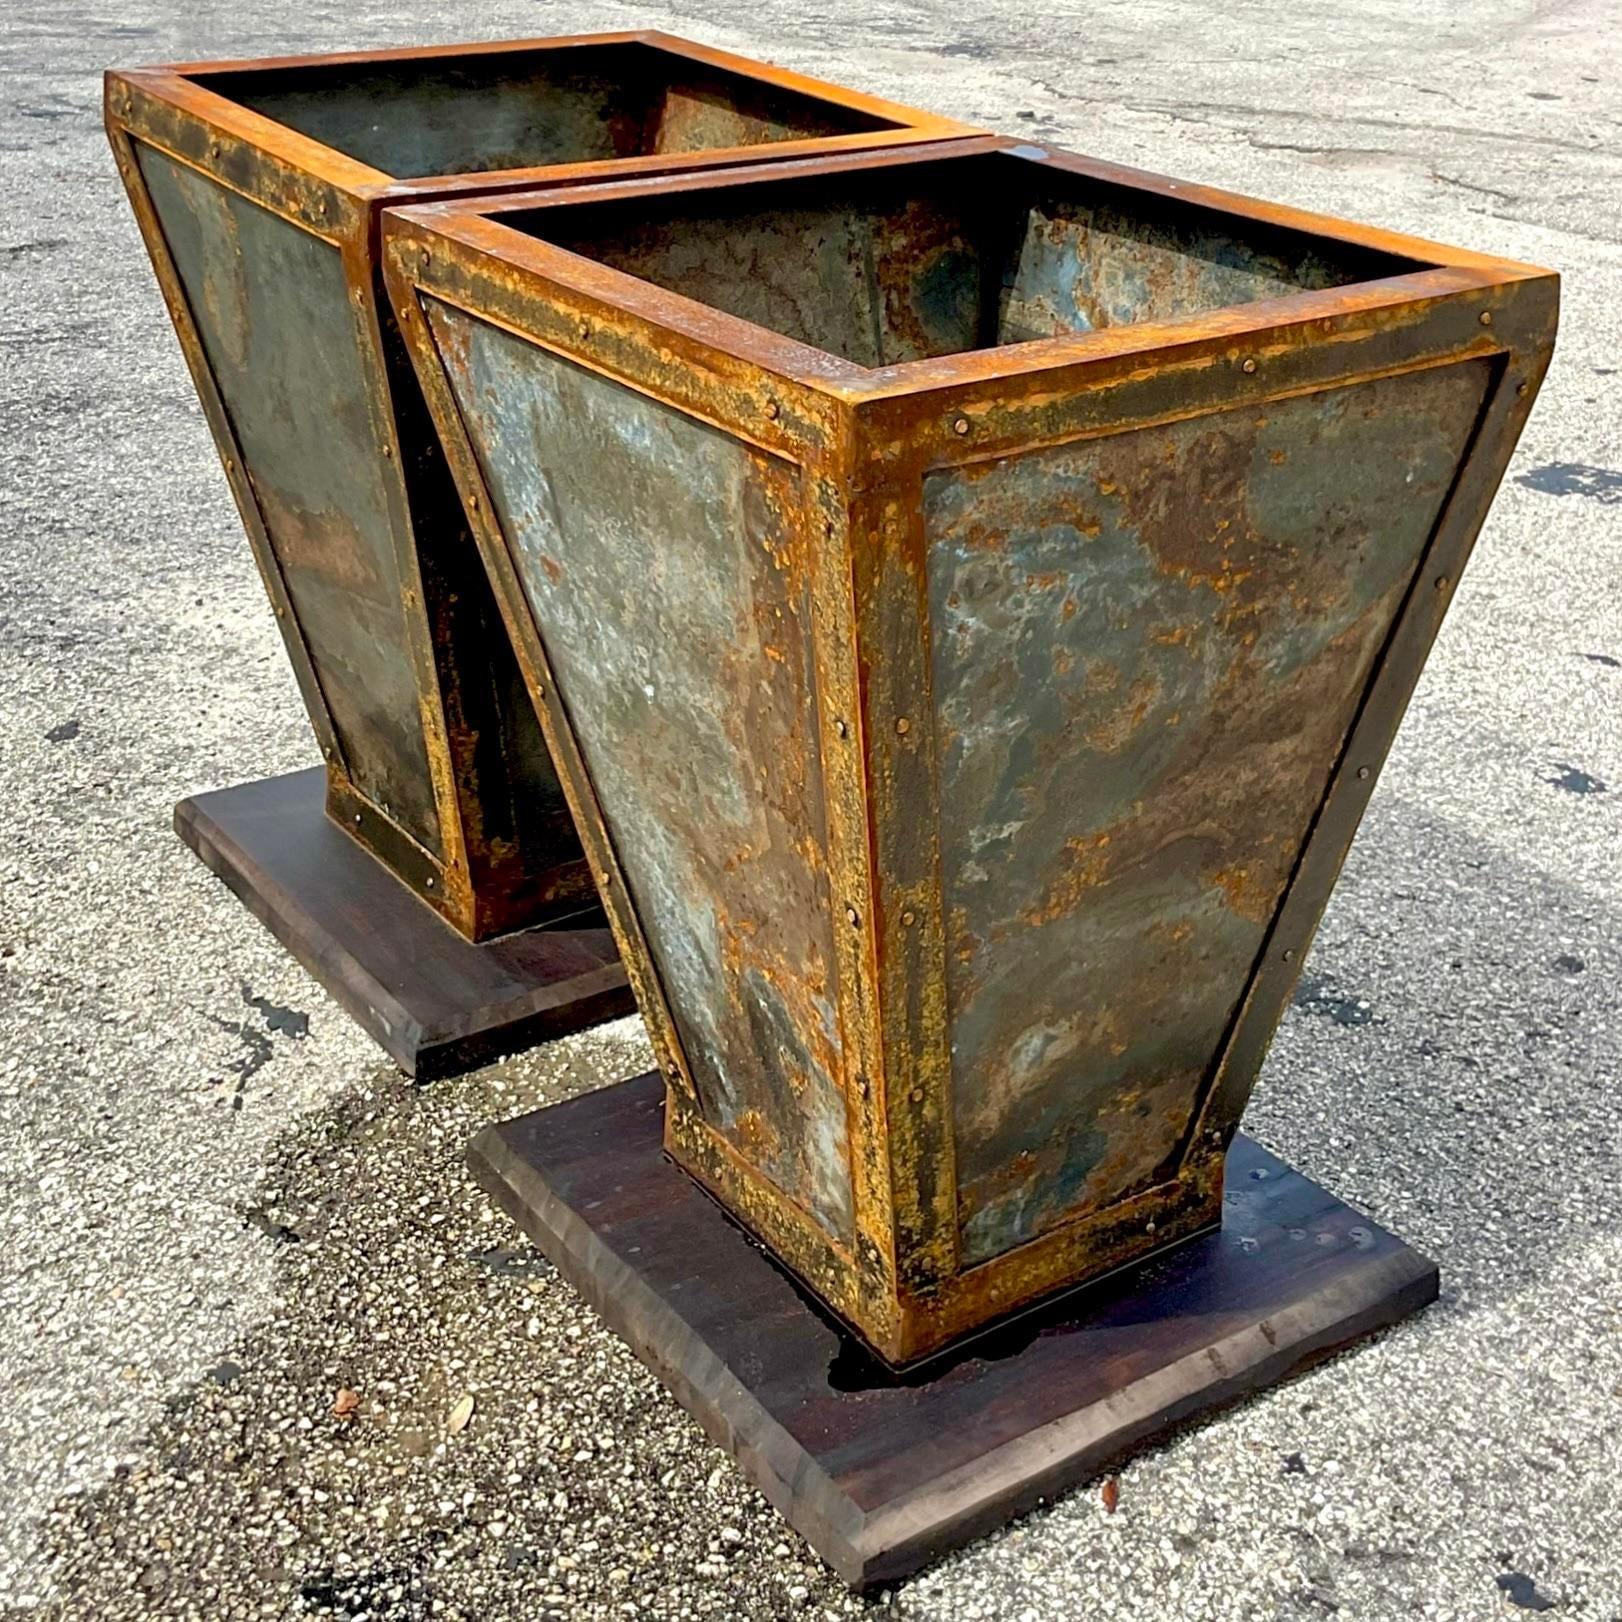 A stunning pair of vintage Boho planters. The most incredible all over patinated finish. Thr planters rest on wooden plinths. Acquired from a Palm Beach estate.